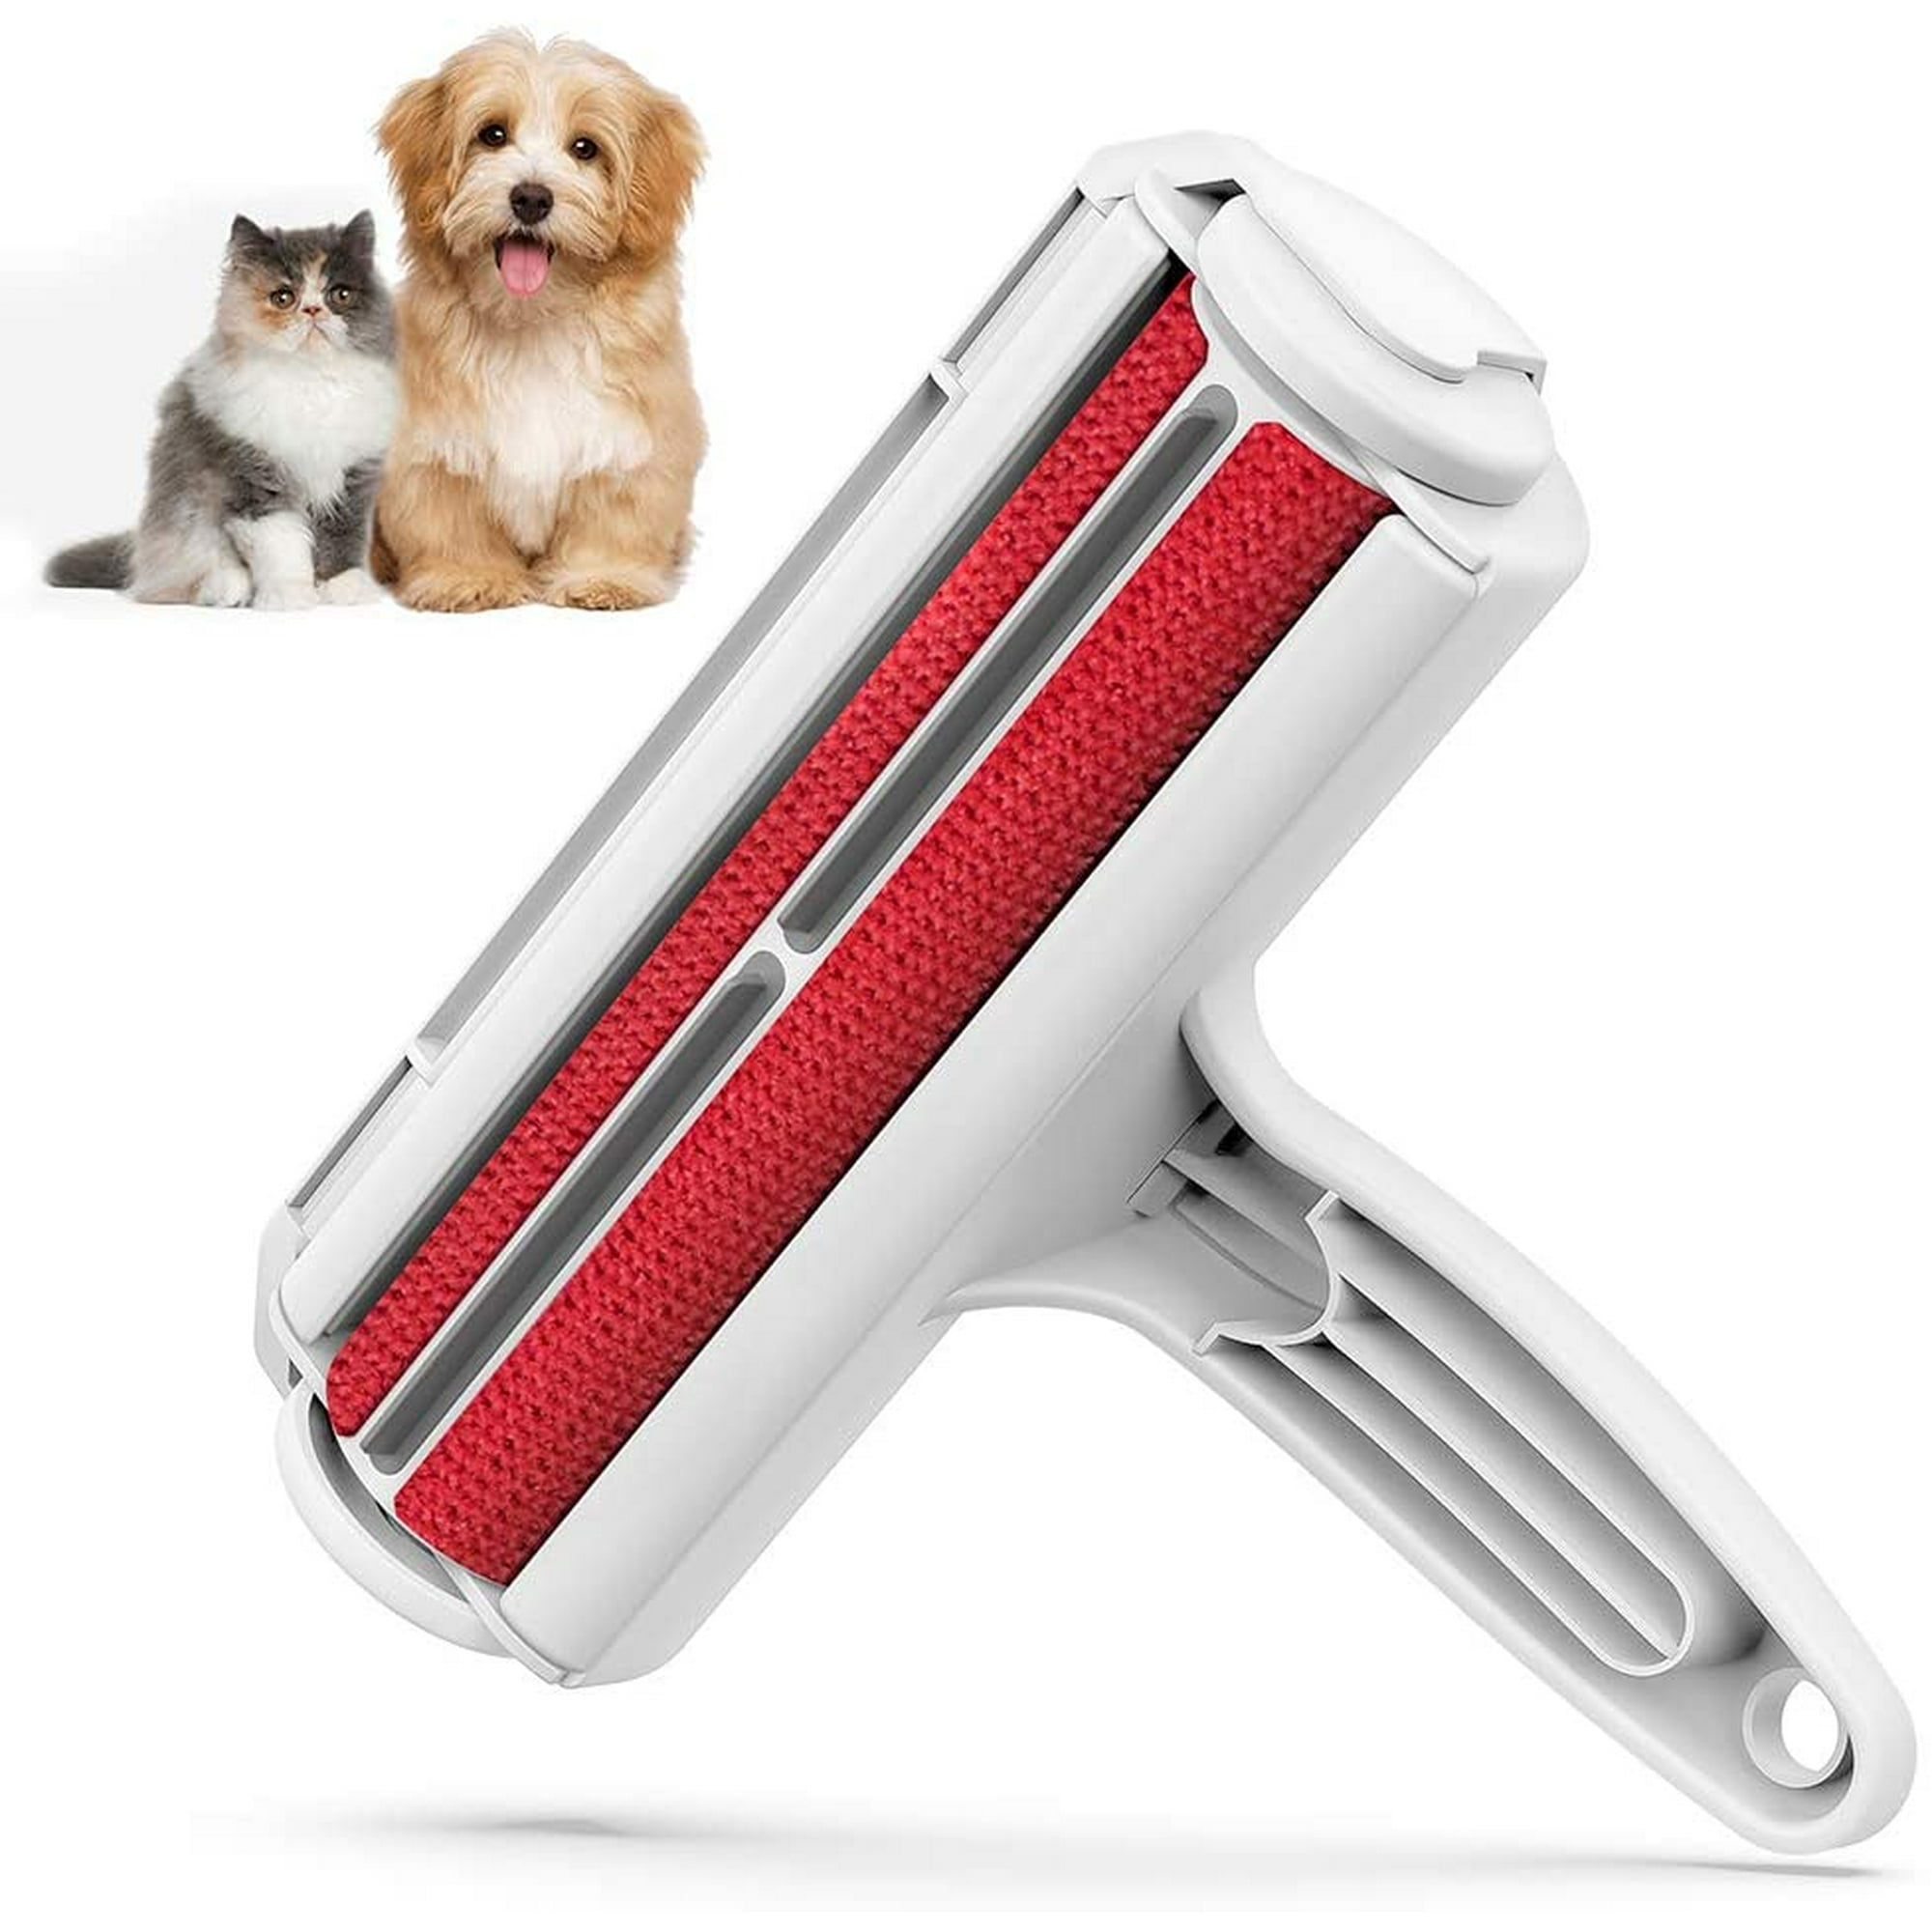 Pet Hair Remover Roller - Dog & Cat Fur Remover with Self-Cleaning Base -  Efficient Animal Hair Removal Tool - Perfect for Furniture, Couch, Carpet,  Car Seat | Walmart Canada